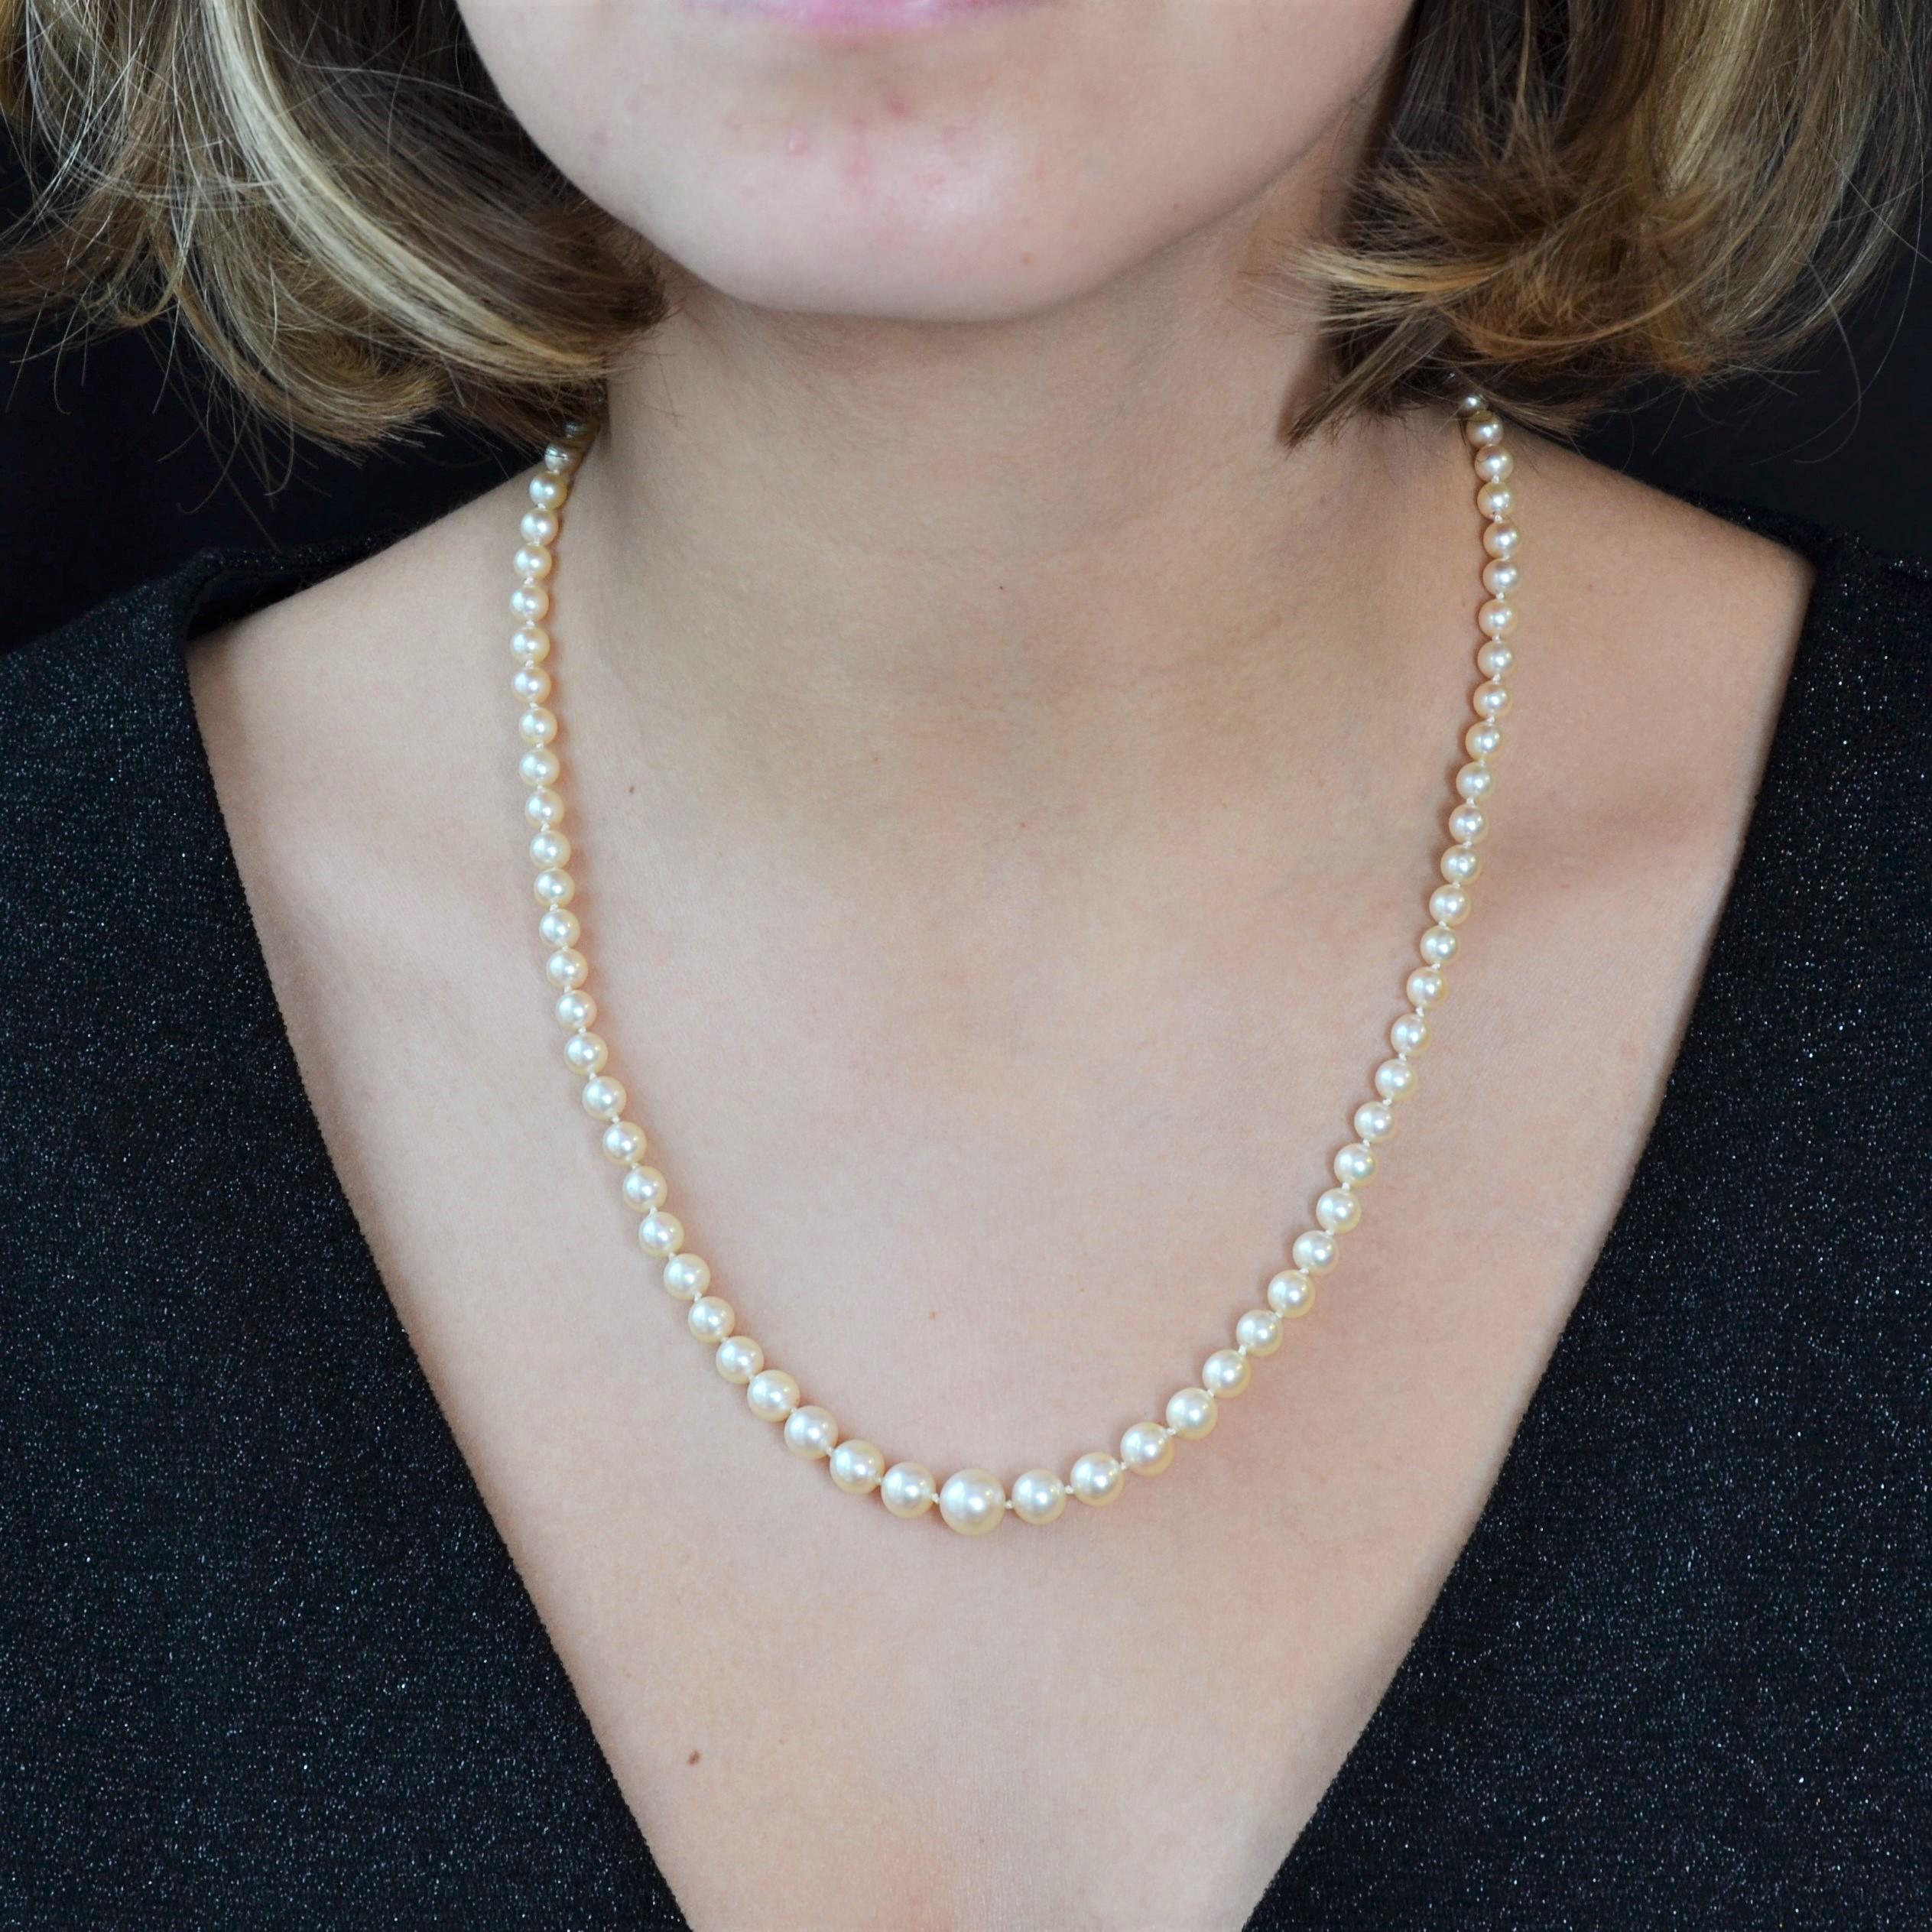  Necklace of cultured pearls in the shaded white orient, of round shape and in fall.
The clasp is in 18 karat white gold, ratchet.
Diameter of pearls : from 4.5/5 mm to 8/8.5 mm.
Length : 50 cm approximately.
Total weight of the jewel : 18,8 g